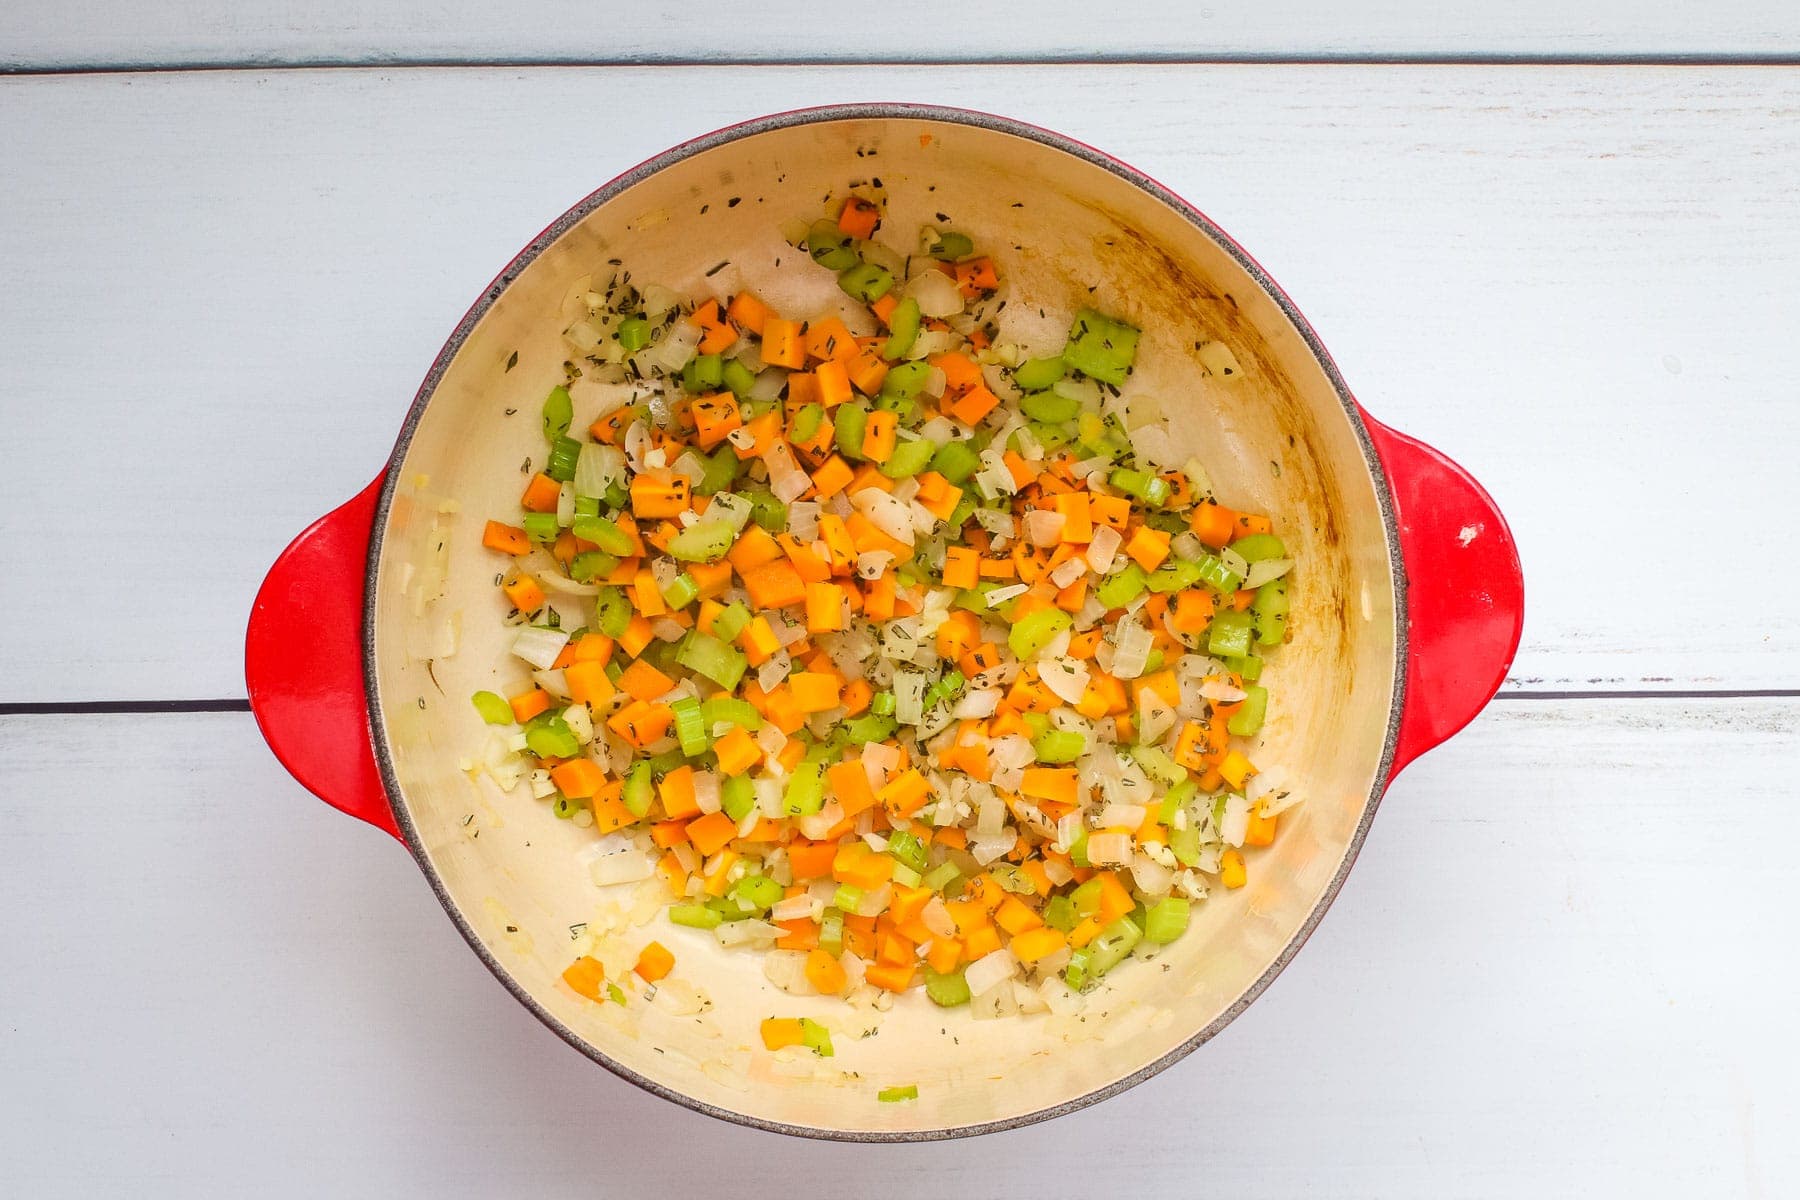 Saute onion, celery, carrots and garlic in a Dutch oven or large pot.